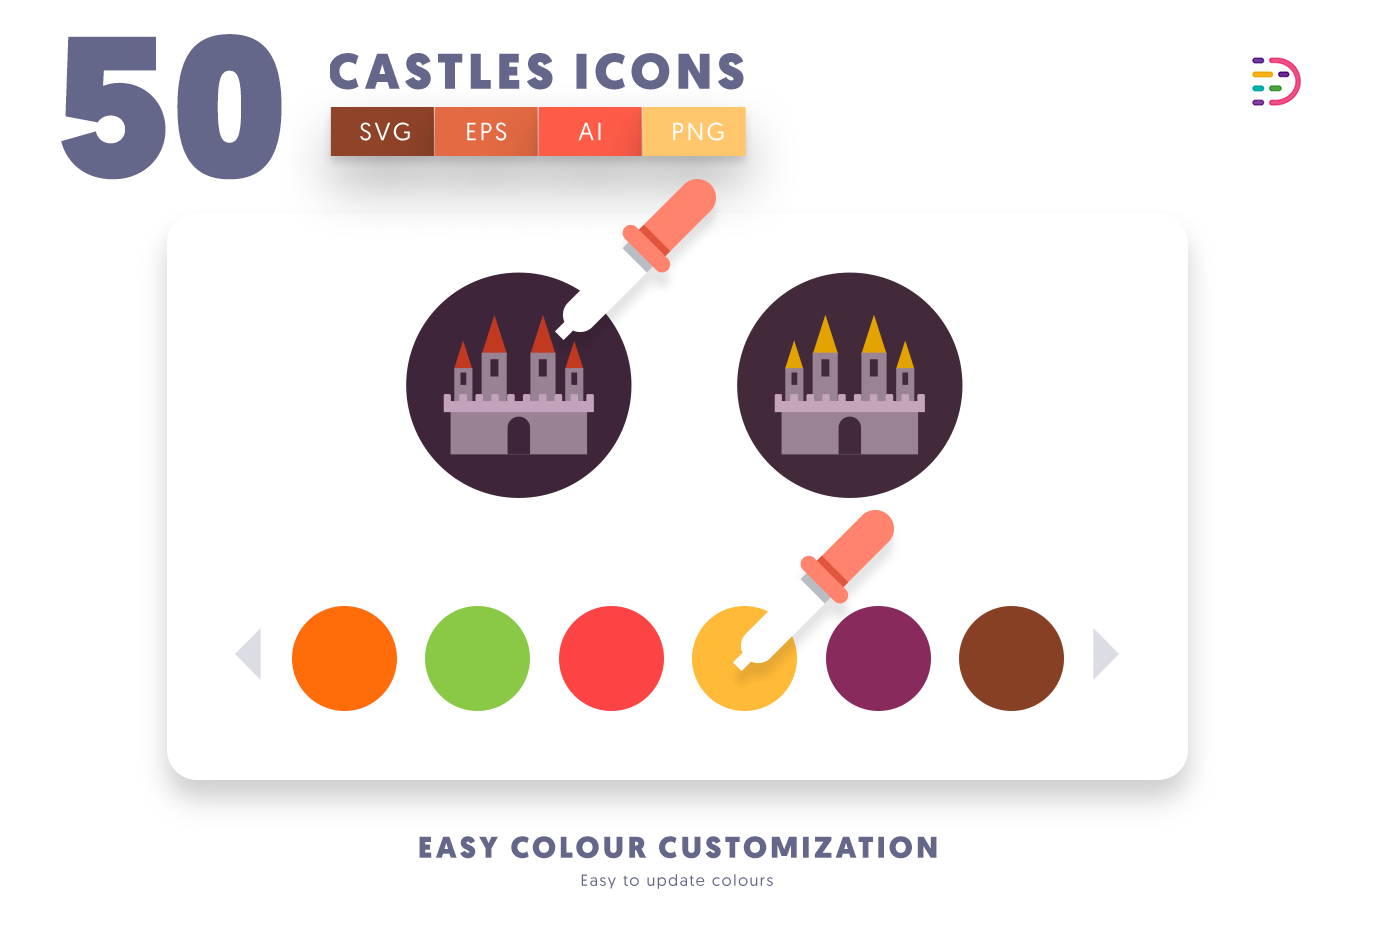 EPS, SVG, PNG full vector 50 Castle Icons